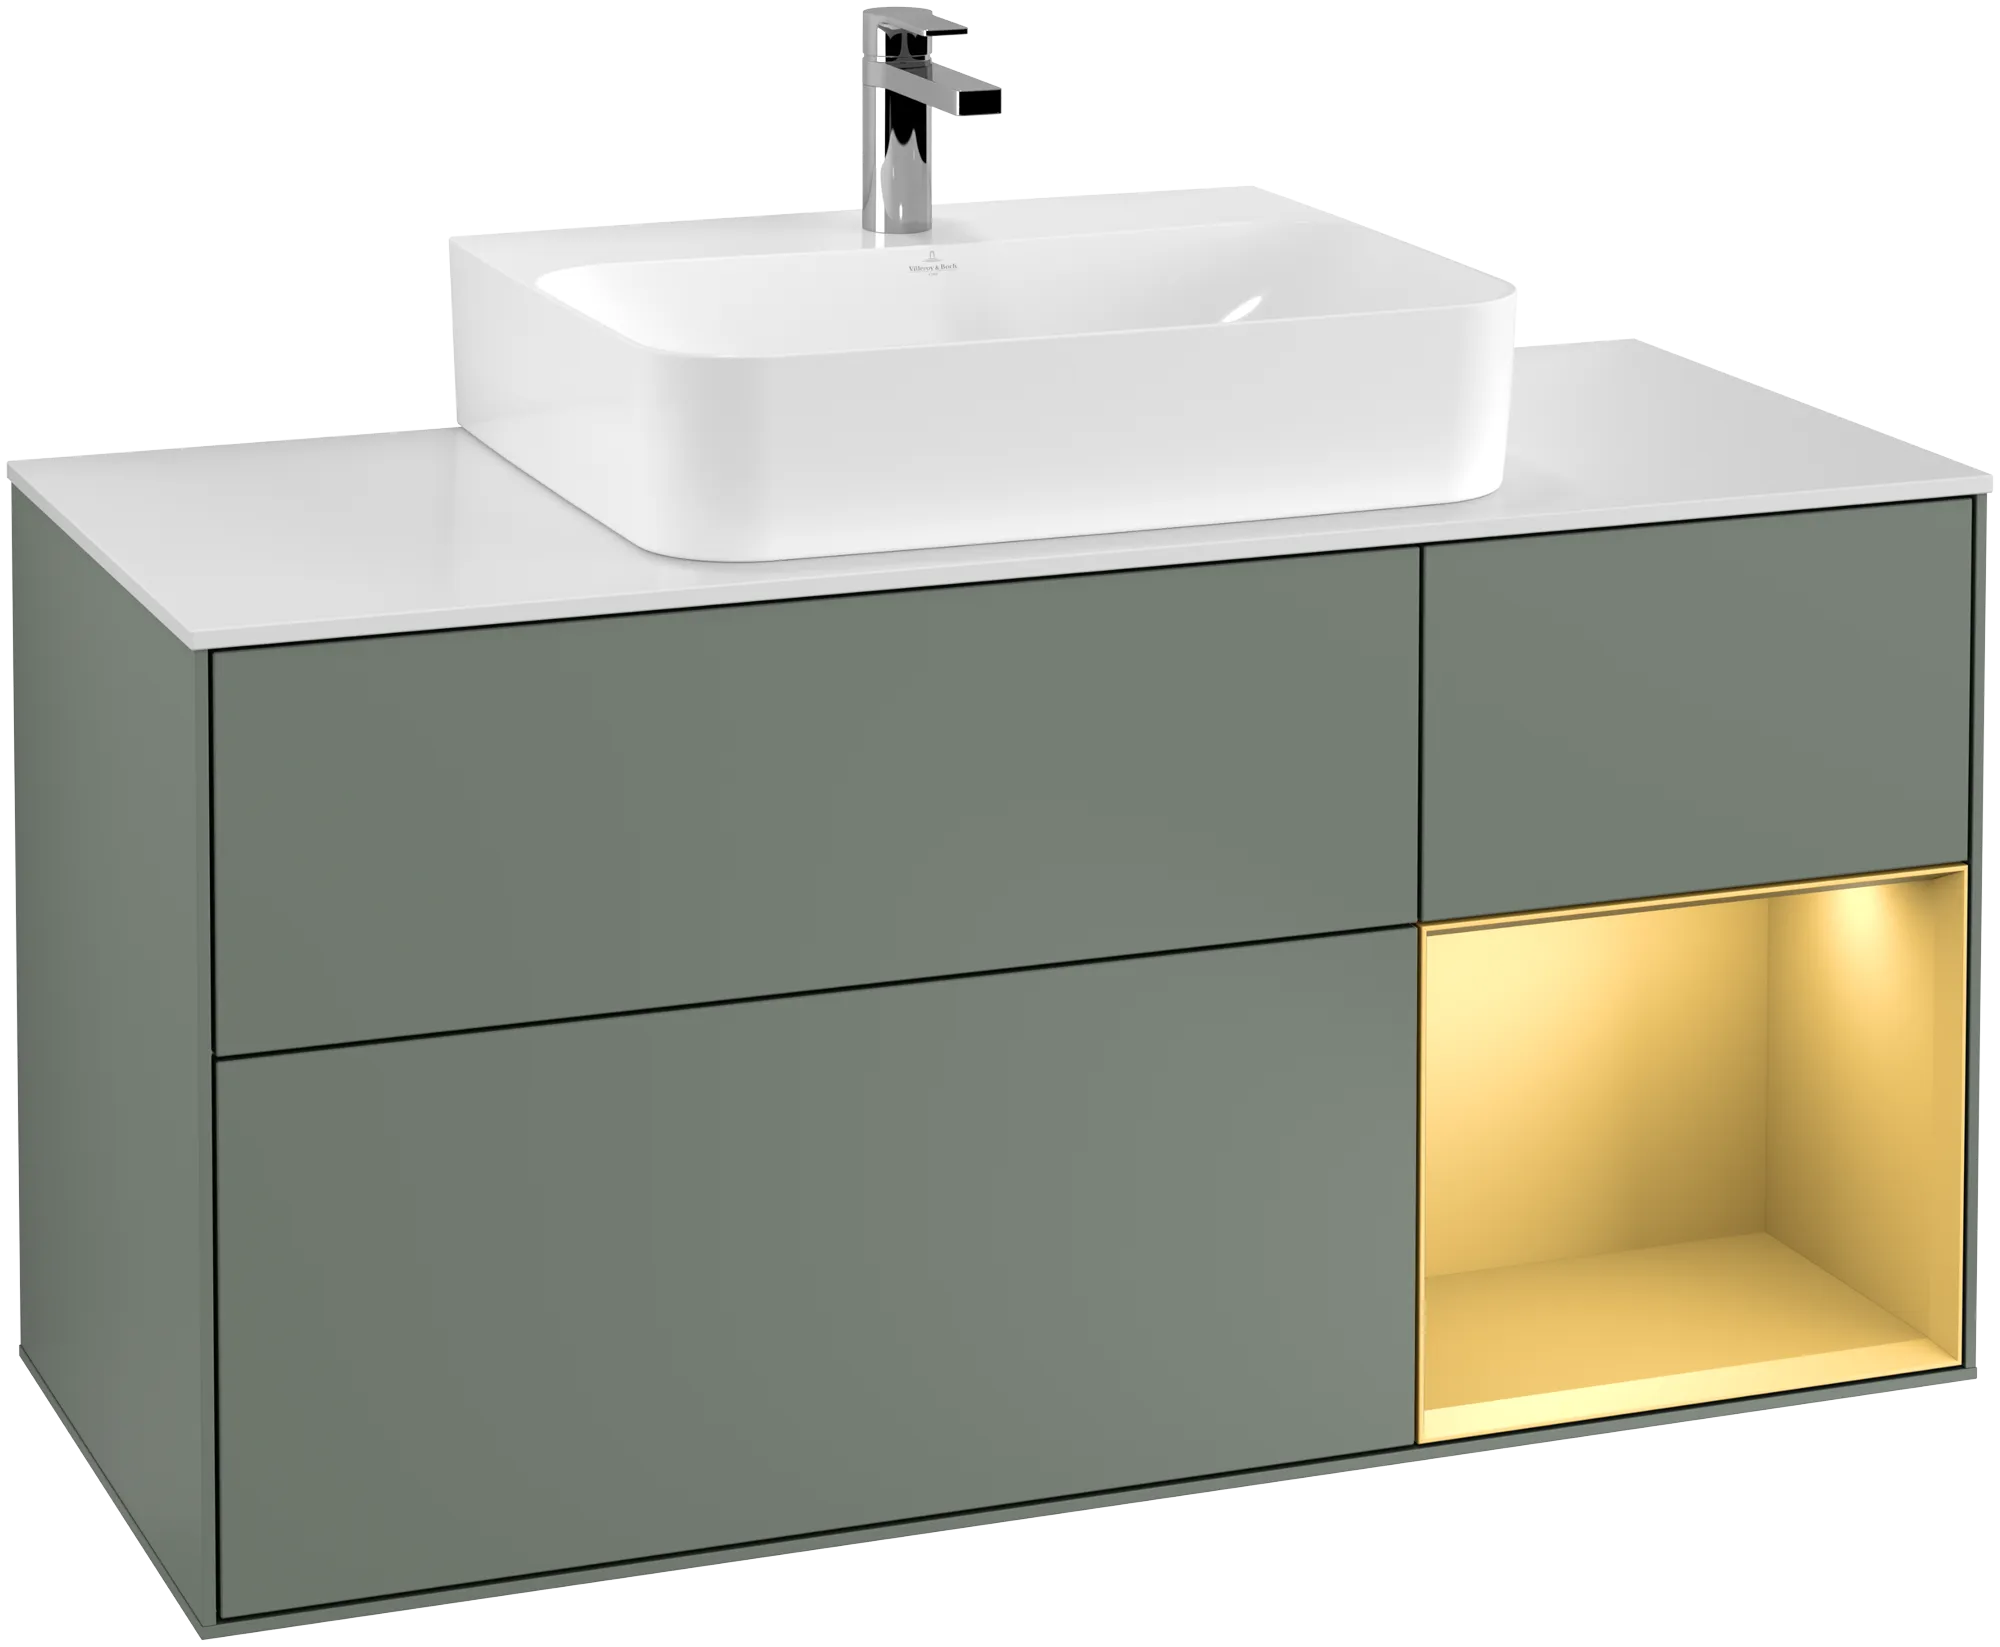 VILLEROY BOCH Finion Vanity unit, with lighting, 3 pull-out compartments, 1200 x 603 x 501 mm, Olive Matt Lacquer / Gold Matt Lacquer / Glass White Matt #G171HFGM resmi